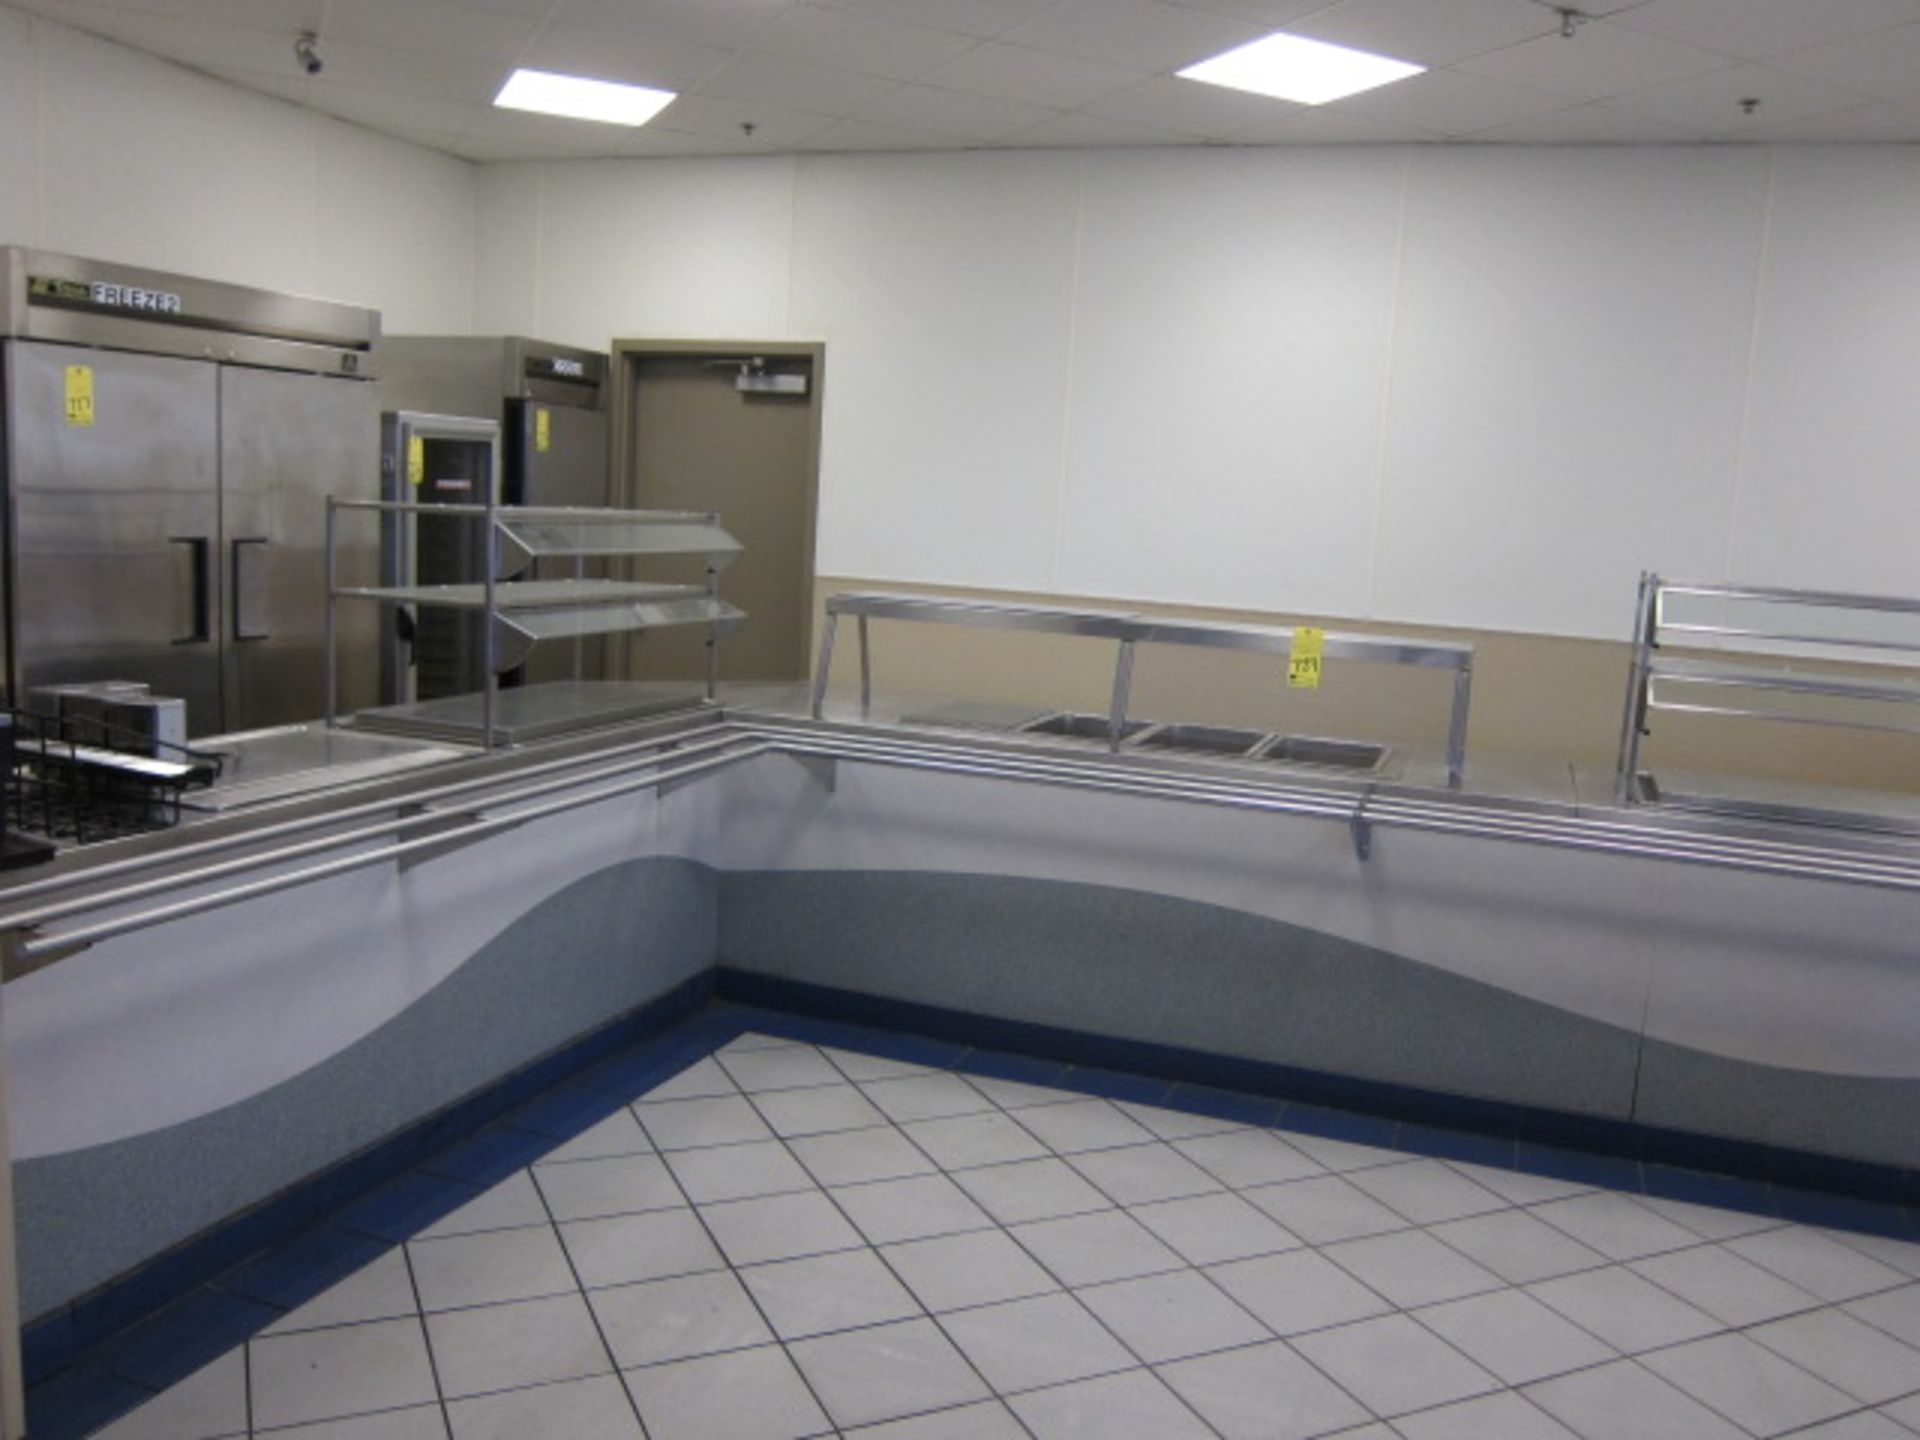 STAINLESS STEEL CAFETERIA LINE w/tray rail, built-in steam table pans & salad station